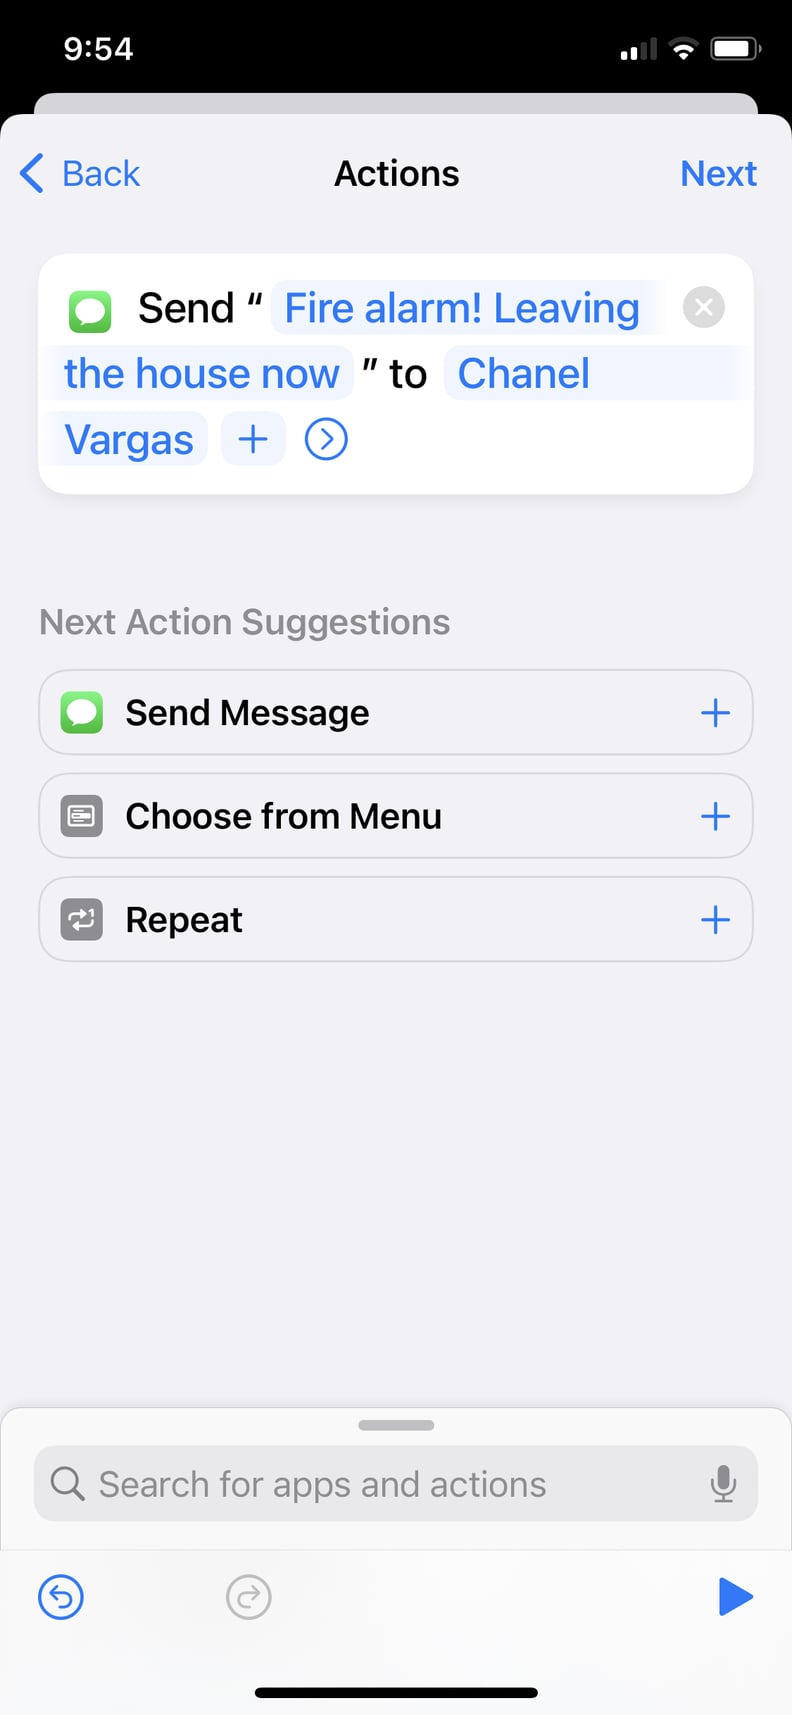 Type Out the Recipient and the Message You Want to Send in Response to the Sound